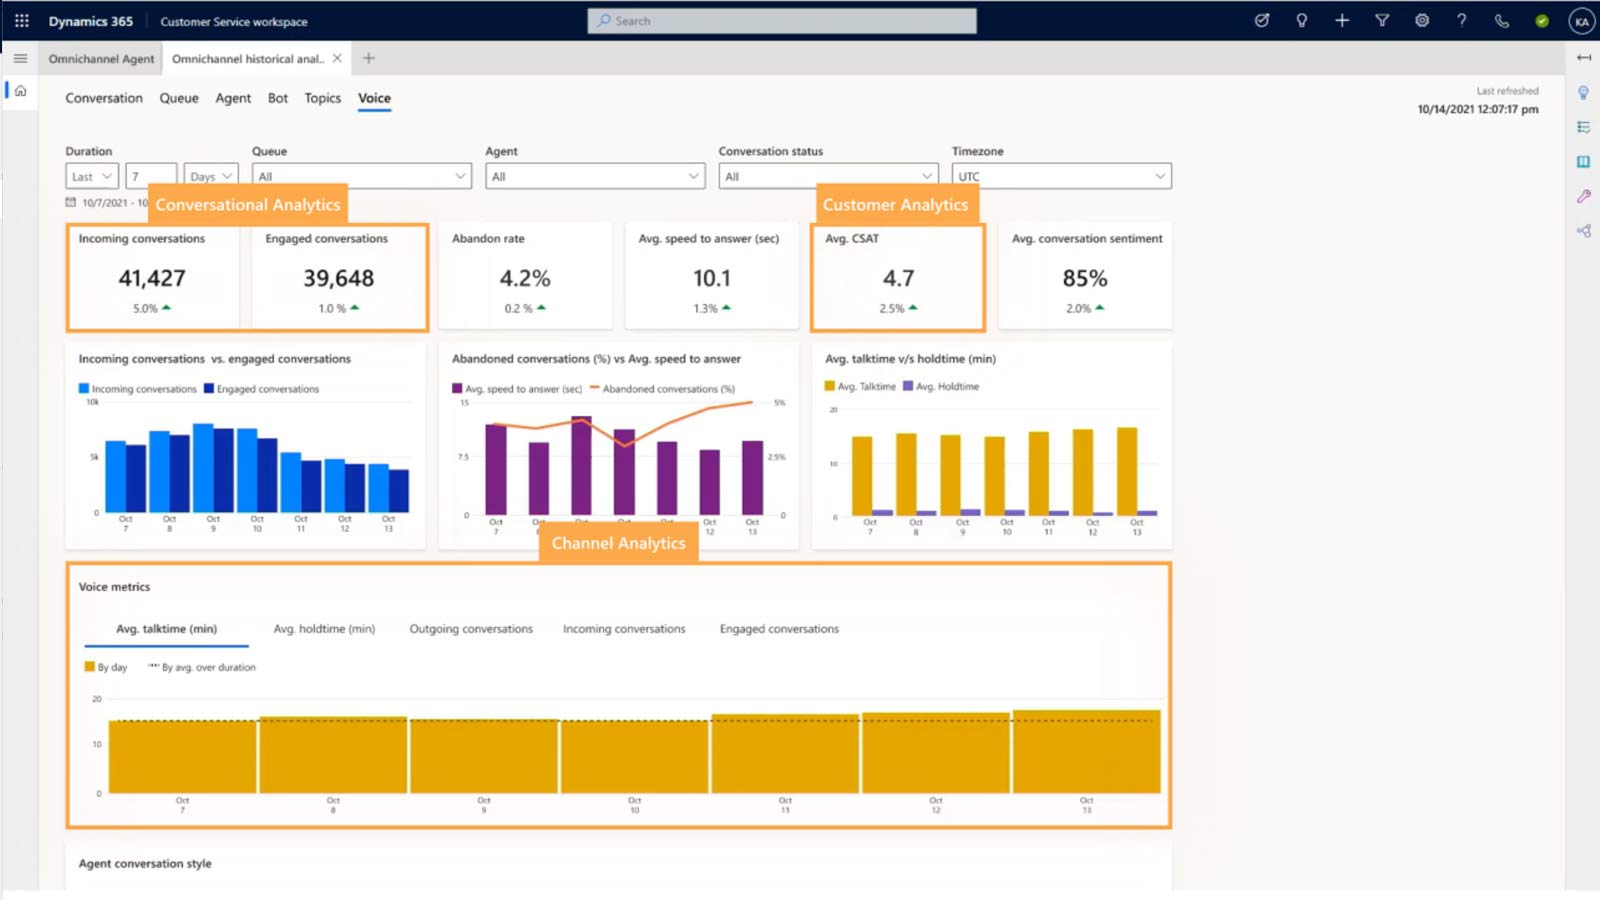 Dynamics 365 Customer Service Customer and channel analytics